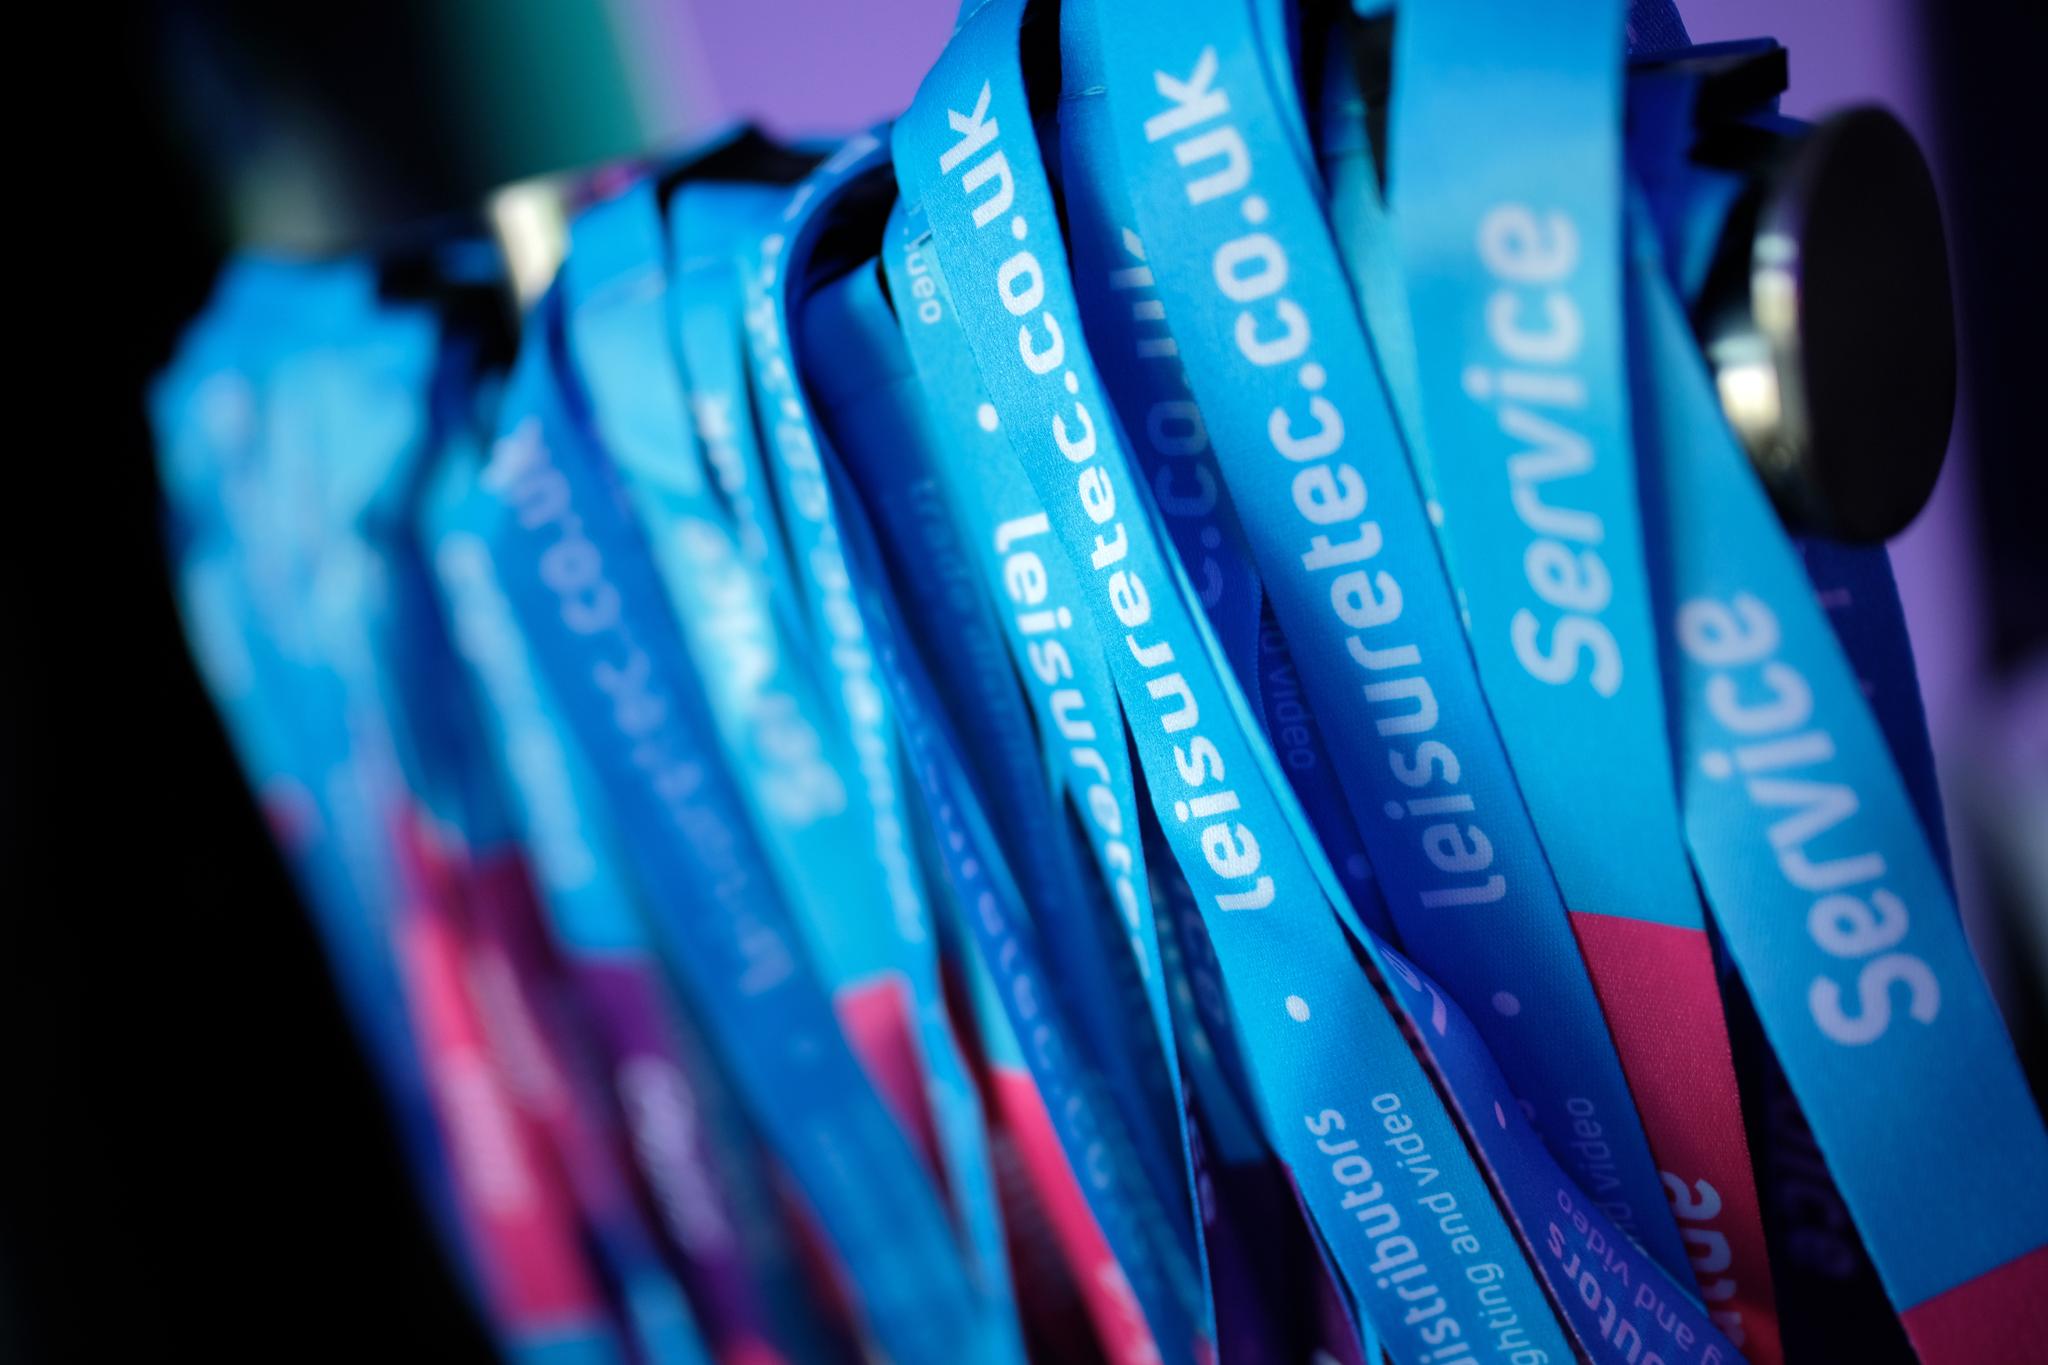 leisuretech branded lanyards for trade show in Leeds 2019